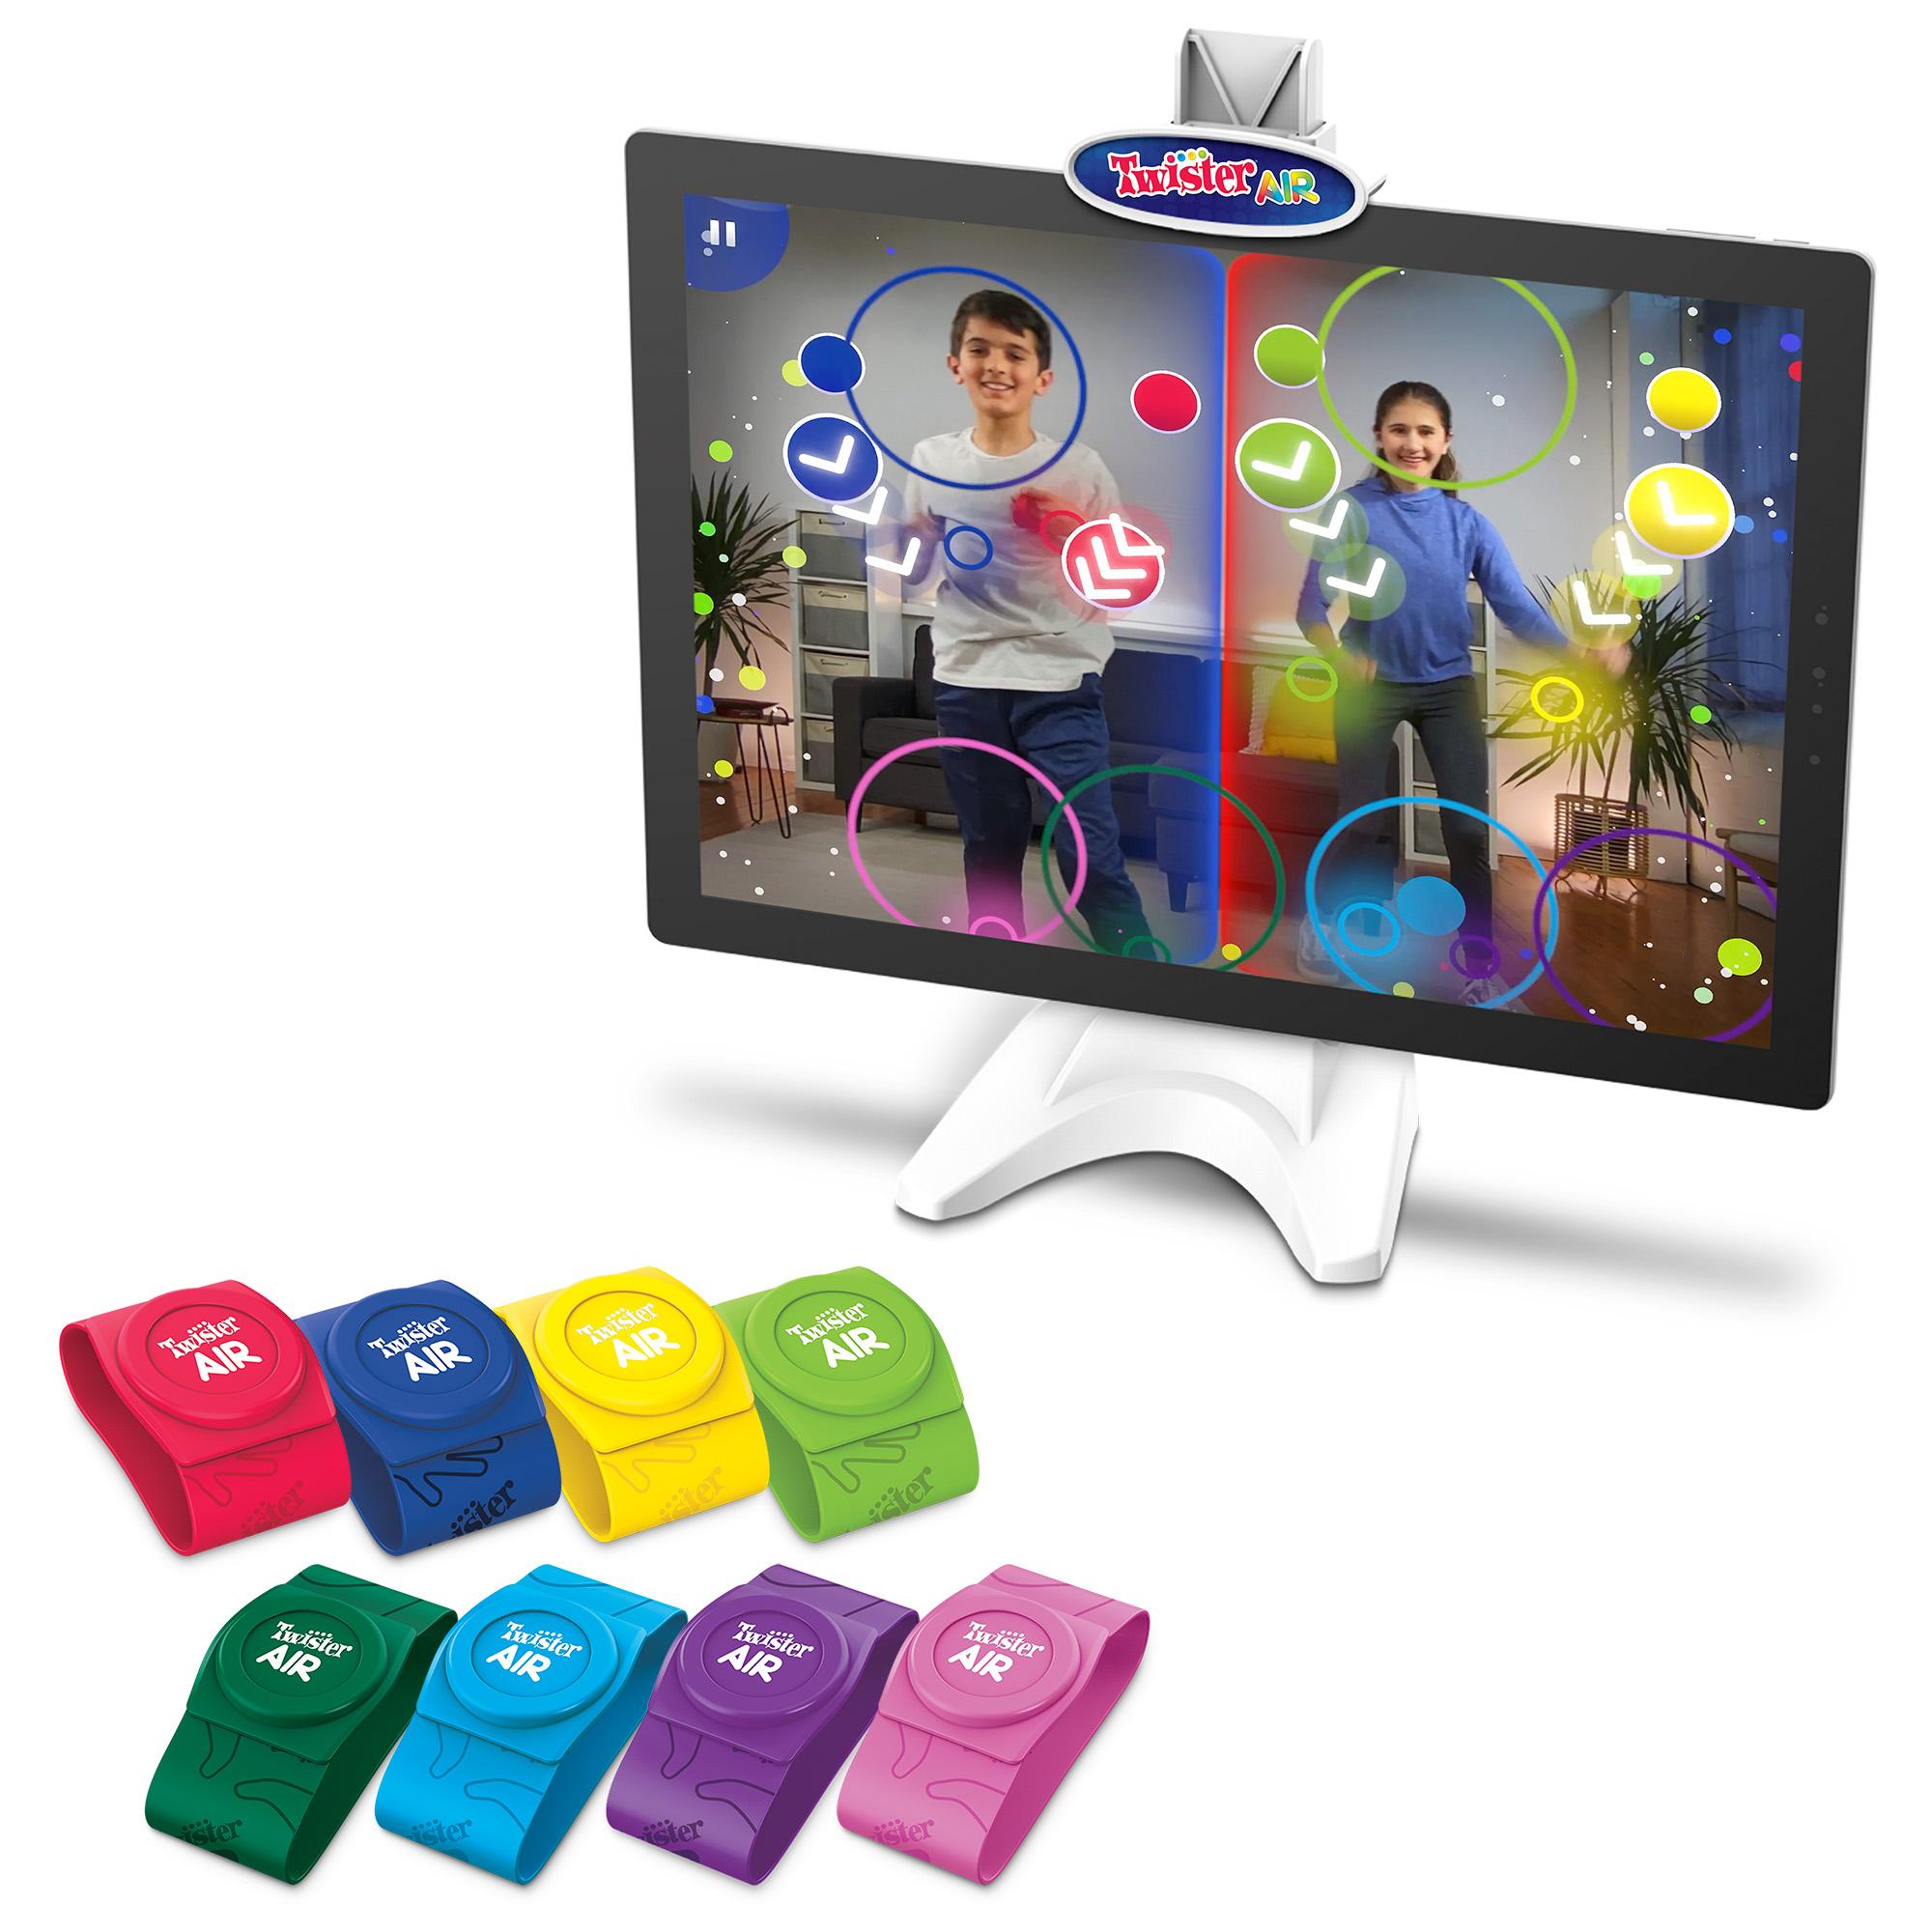 Connect 4 Shots: Space Jam A New Legacy Edition Game for 2 or More Players,  for Kids Ages 8 and Up - Hasbro Games